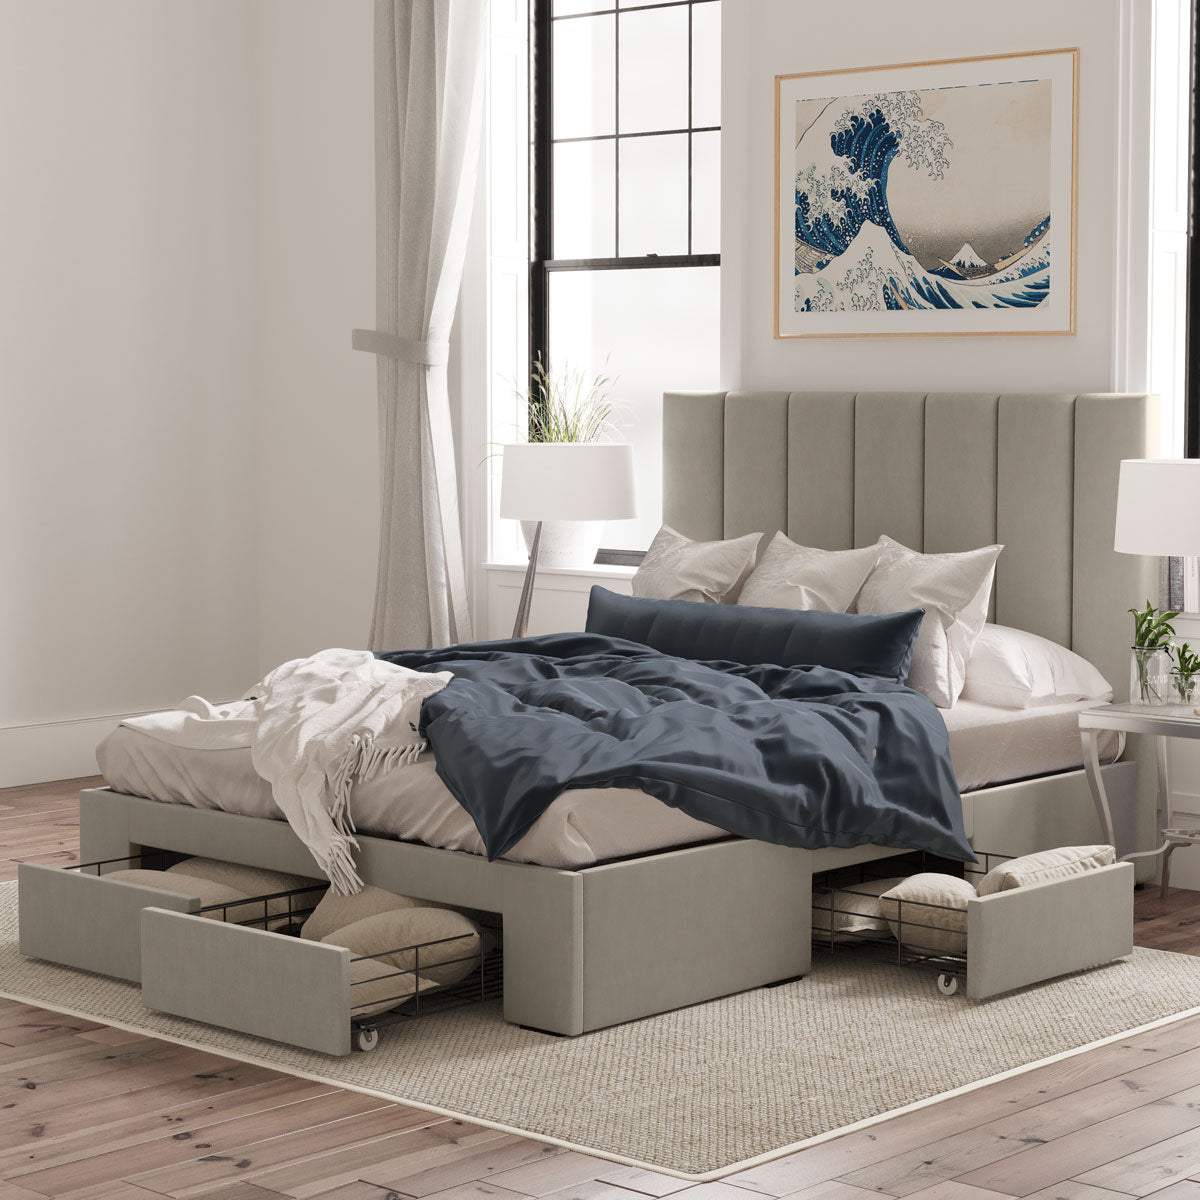 Celine Bed Frame with Four Extra Large Drawers (Natural Beige Fabric)